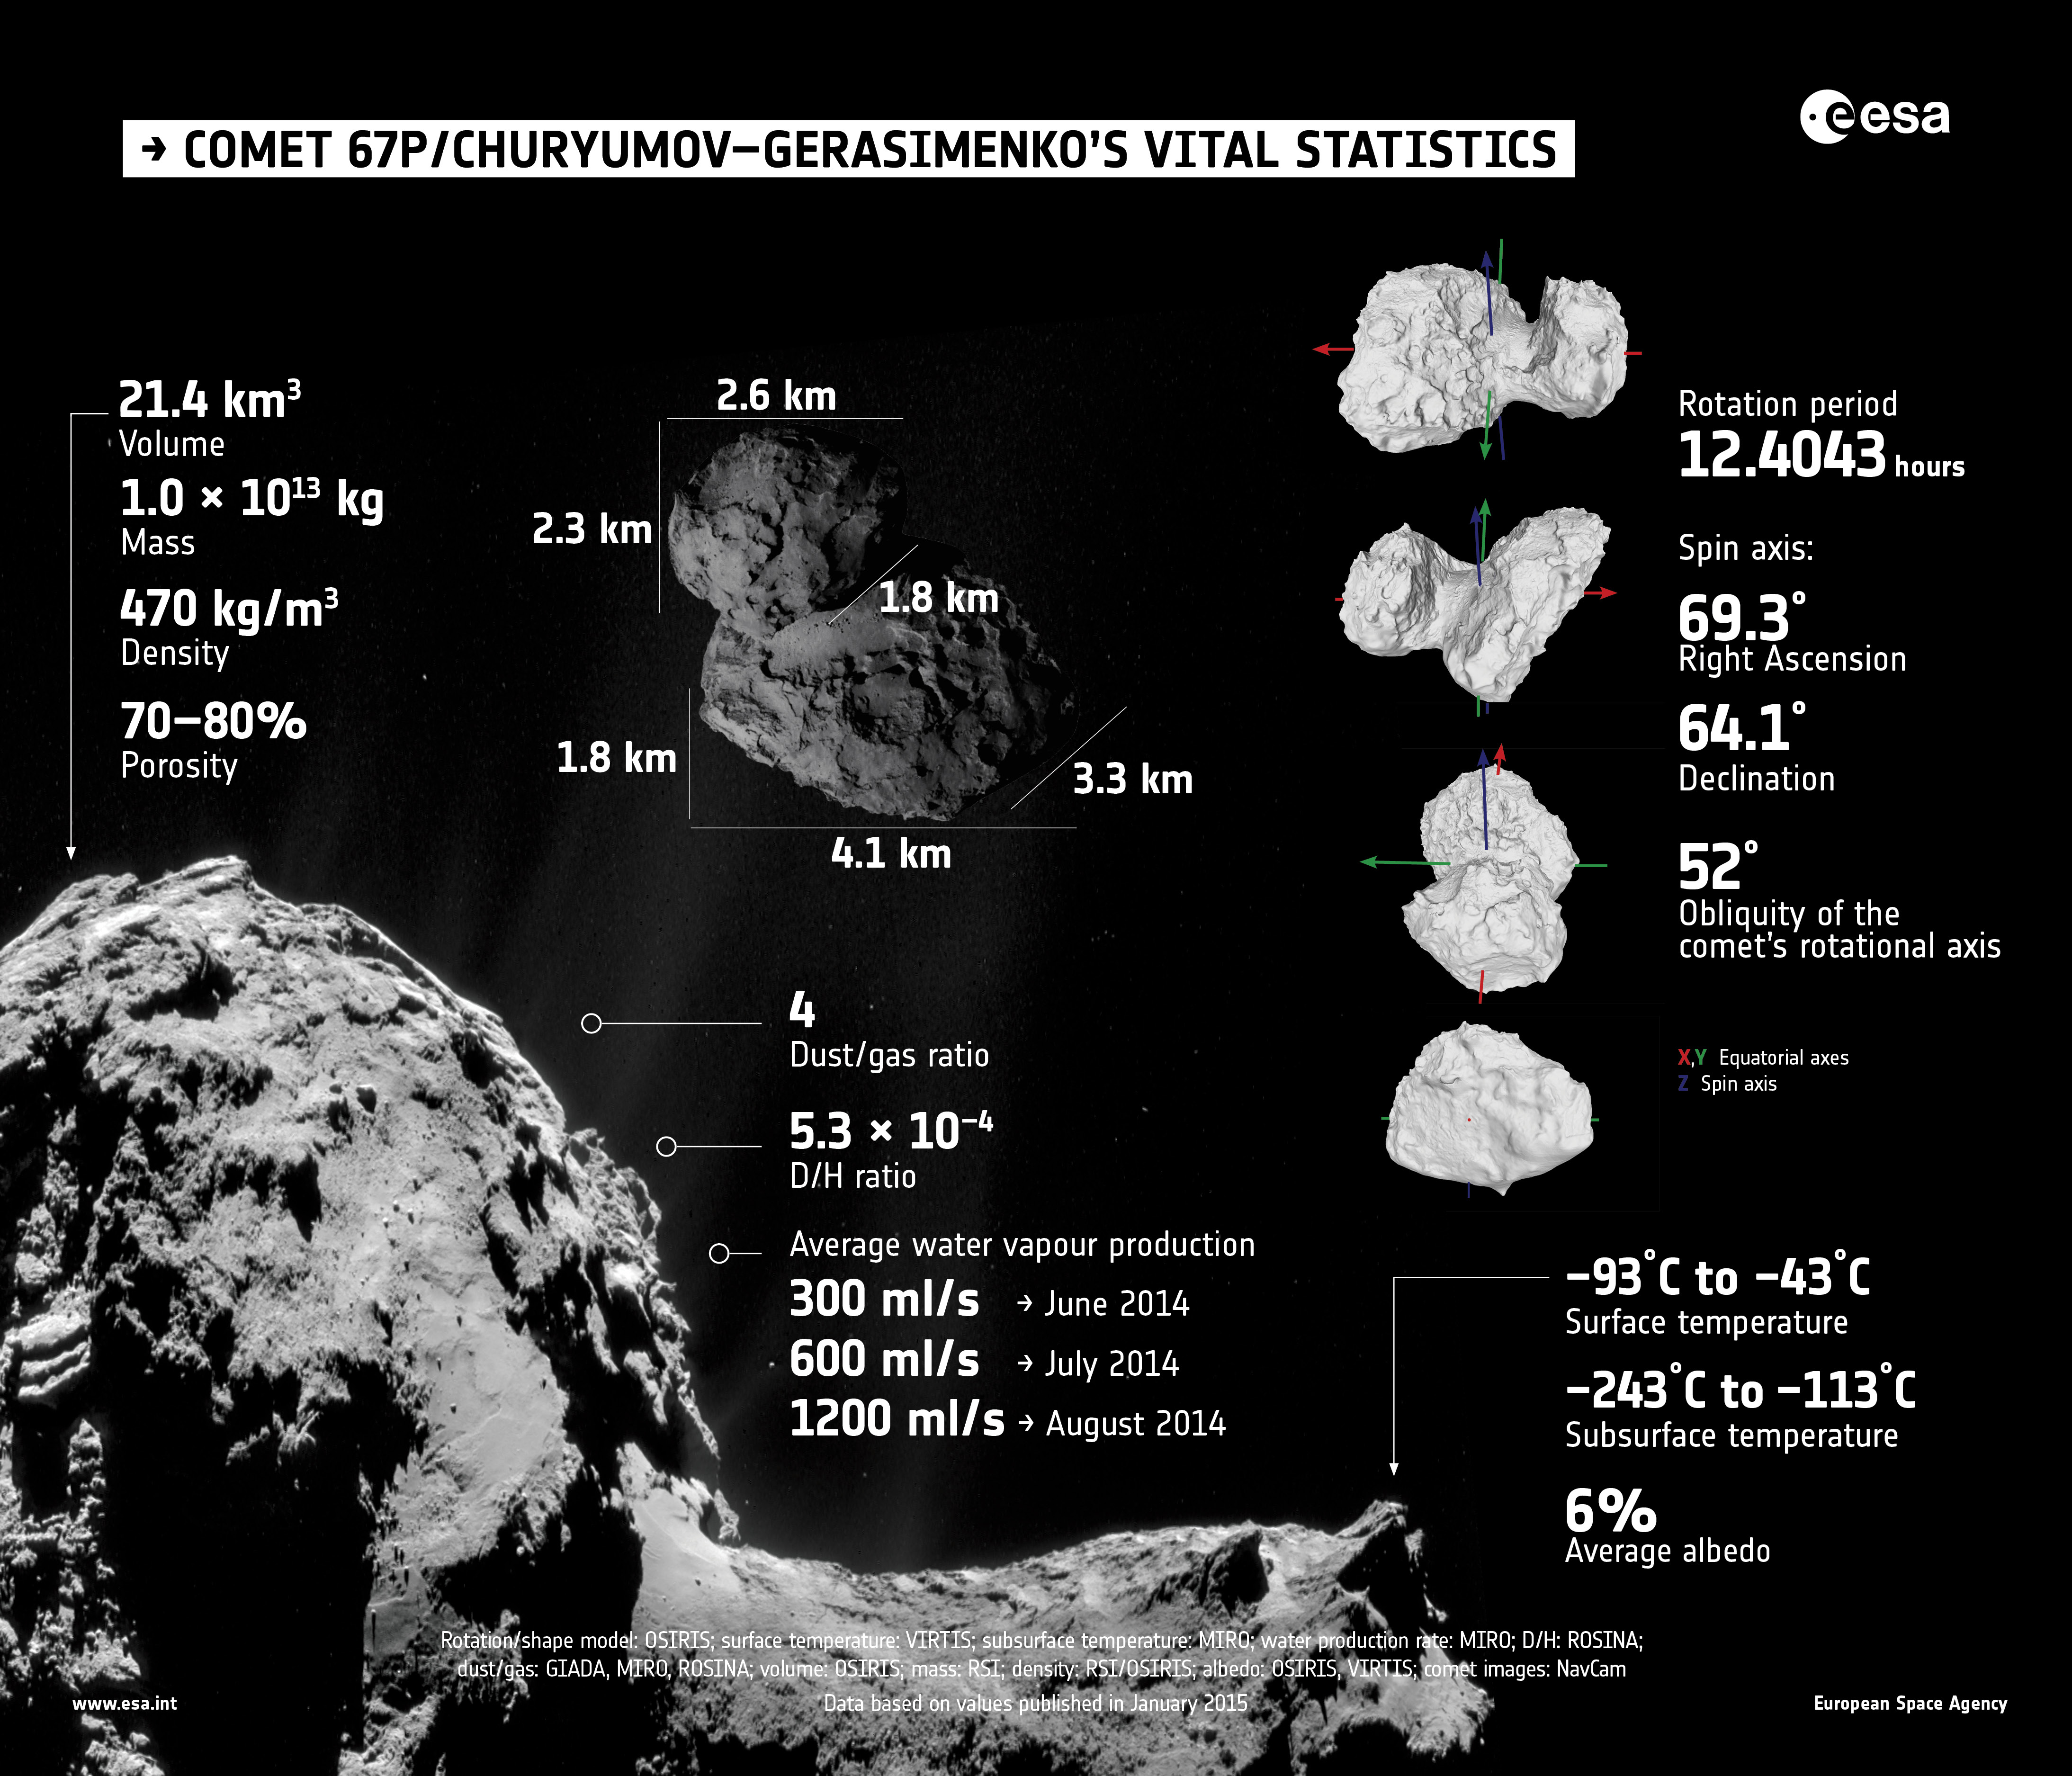 Comet vital statistics.  Summary of properties of Comet 67P/Churyumov–Gerasimenko, as determined by Rosetta’s instruments during the first few months of its comet encounter. Credit: ESA